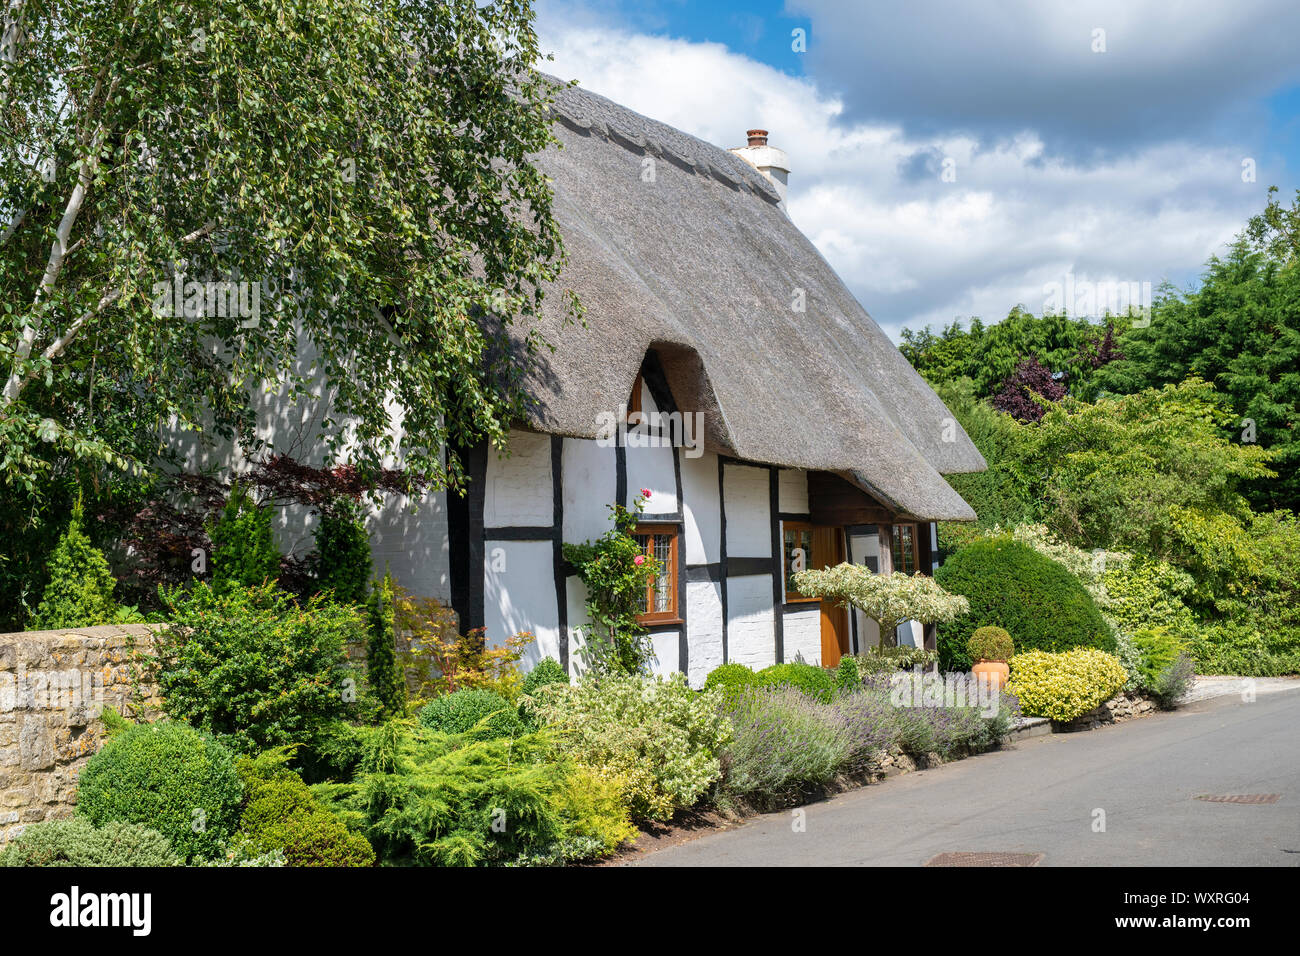 Thatched black and white timber framed cottage along manor lane. Little Comberton , Cotswolds, Wychavon district, Worcestershire, UK Stock Photo